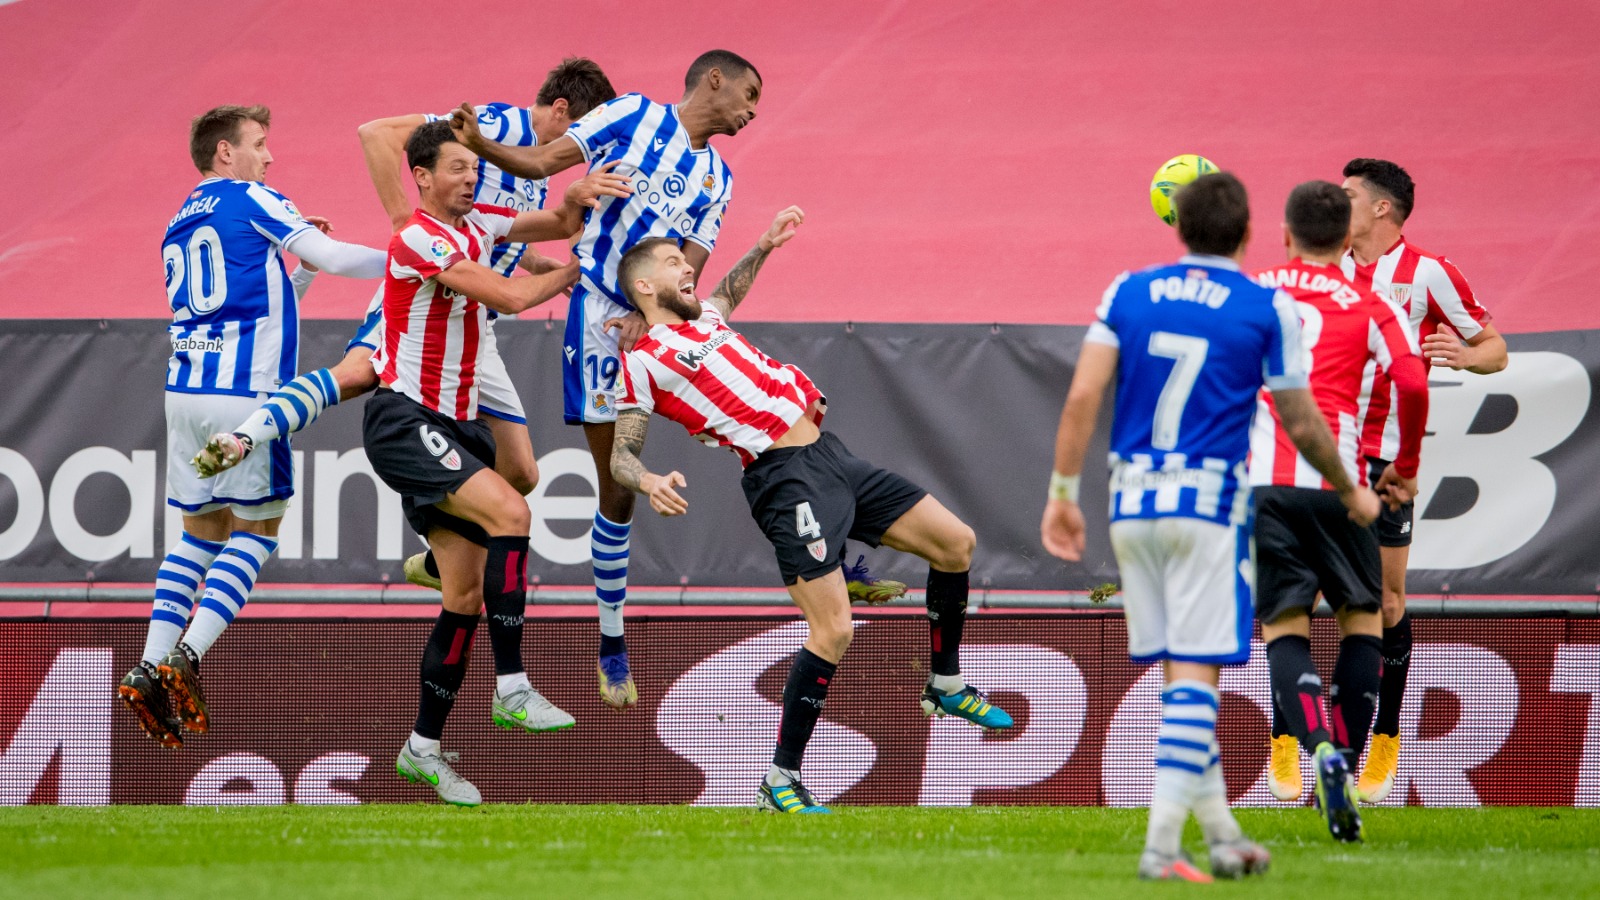 Spanish football morning headlines: Basque Copa final to be played without fans, Tusquets hits out at Laporta, De Jong on goalscoring run